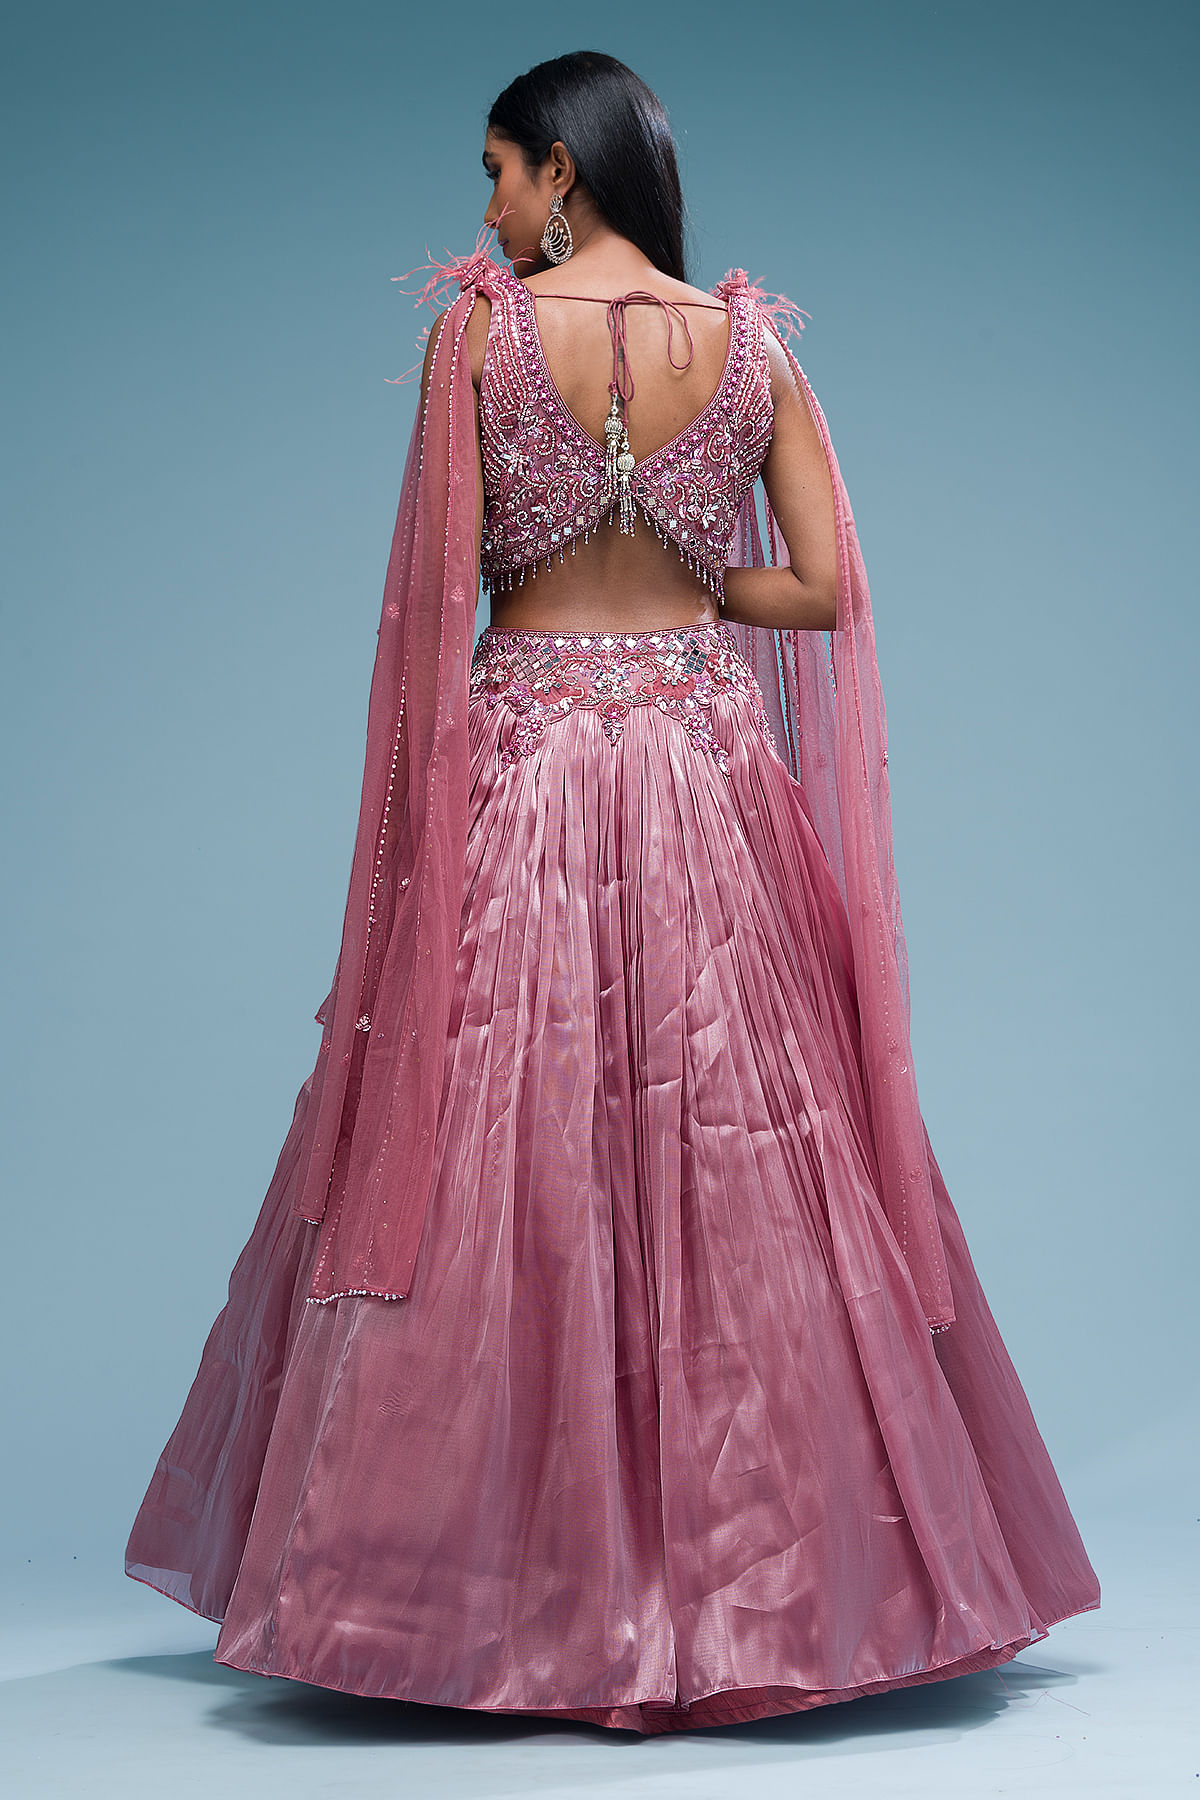 Is Powder Pink The New Red In Bridal Lehengas In 2021-22? | Asian bridal  dresses, Indian bridal dress, Bridal lehenga collection